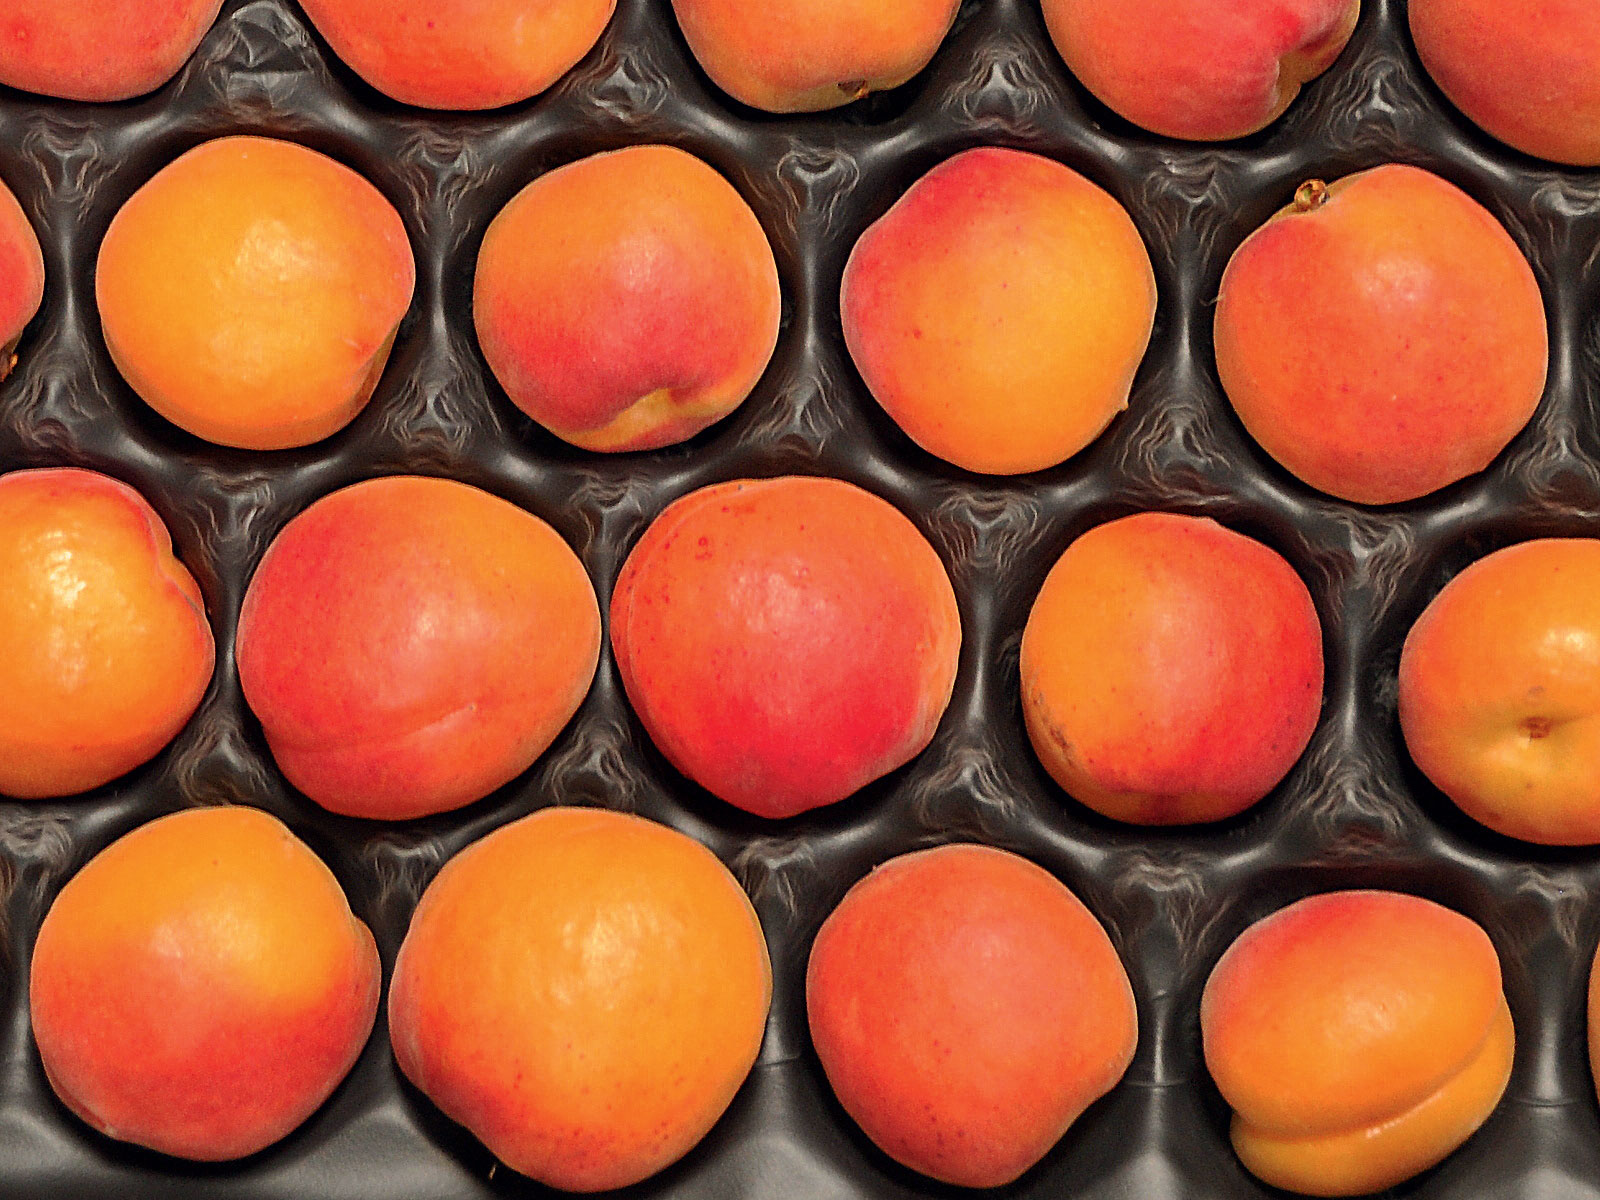 Influence of fruit maturity at harvest, storage temperature and 1-MCP treatment on quality of apricots